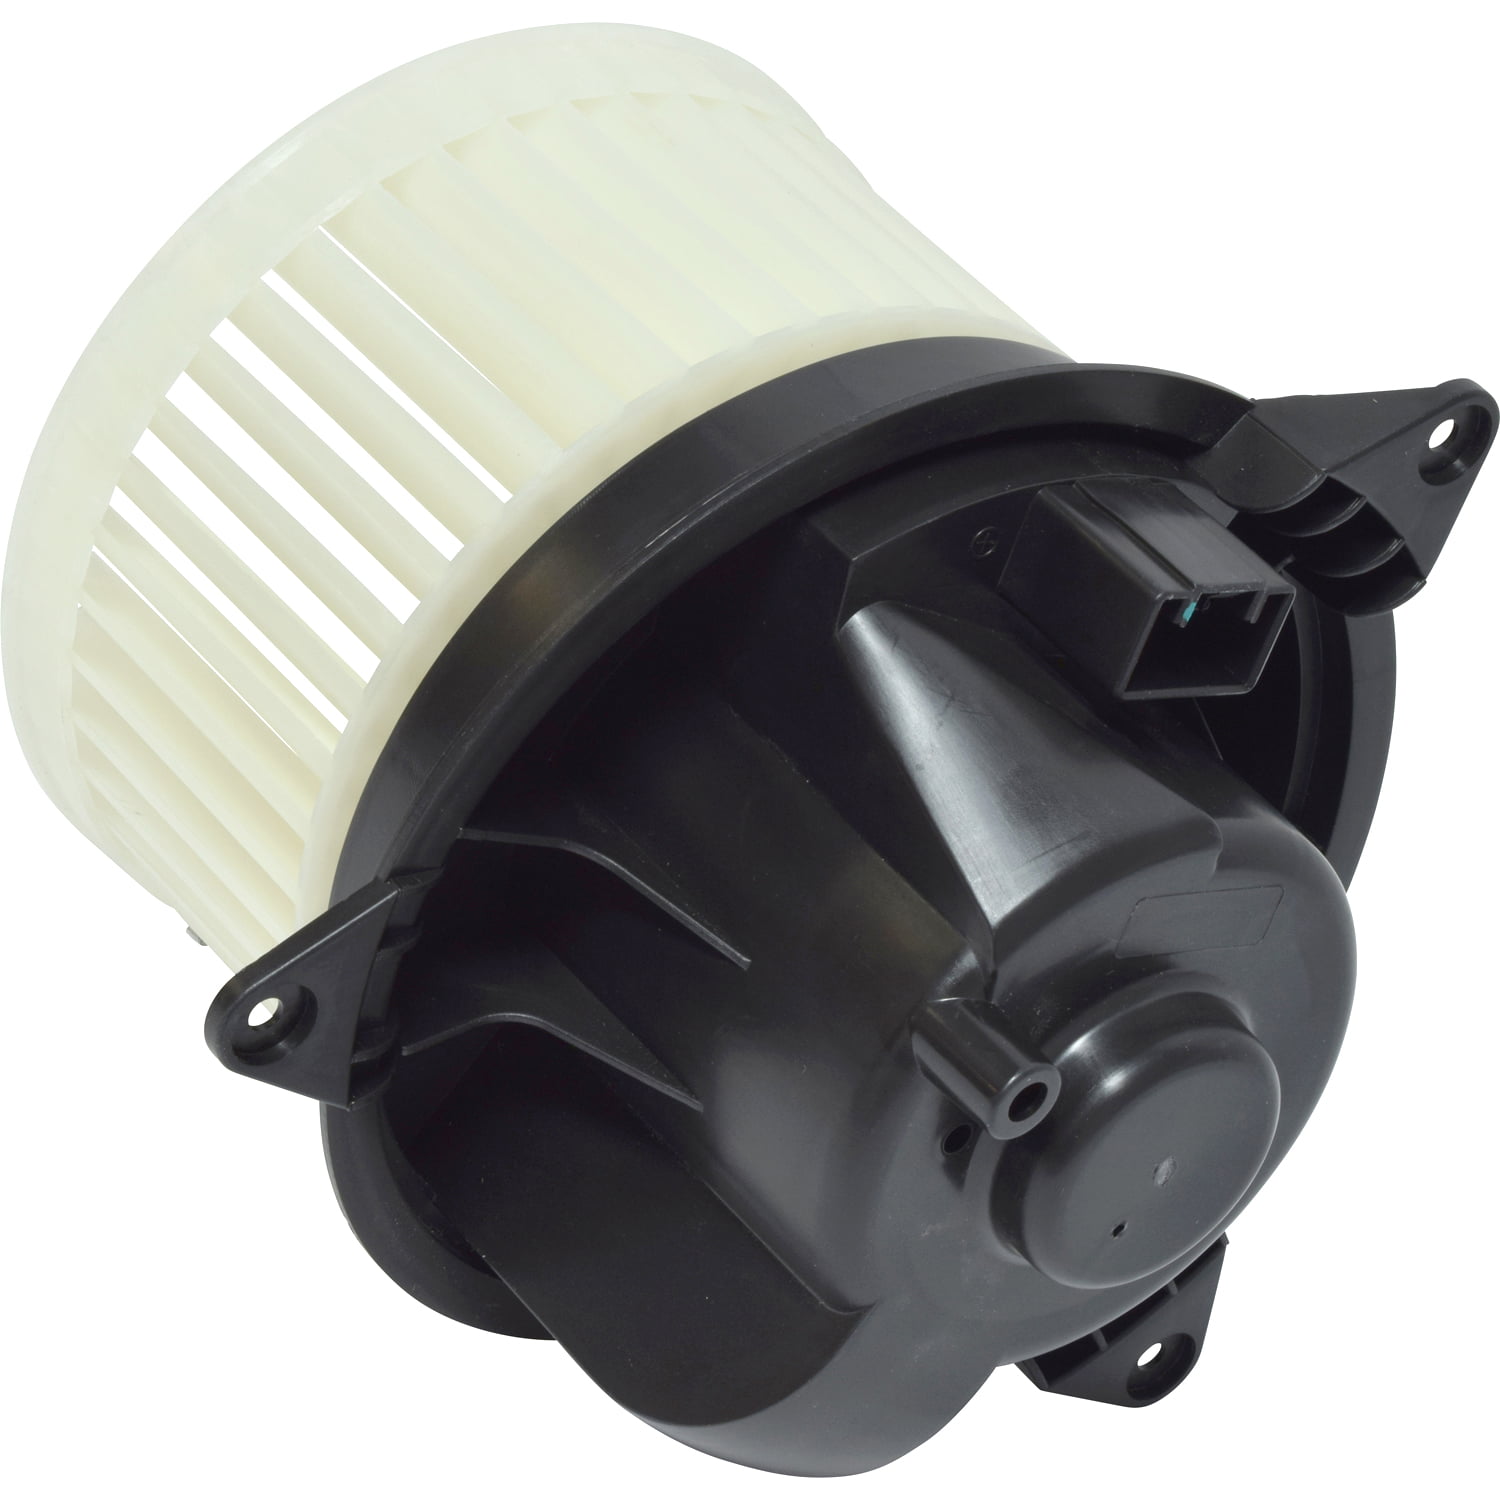 A/C Blower Motor fits Ford Focus 2000-2007 Transit Connect 2010-2013 BM-1204